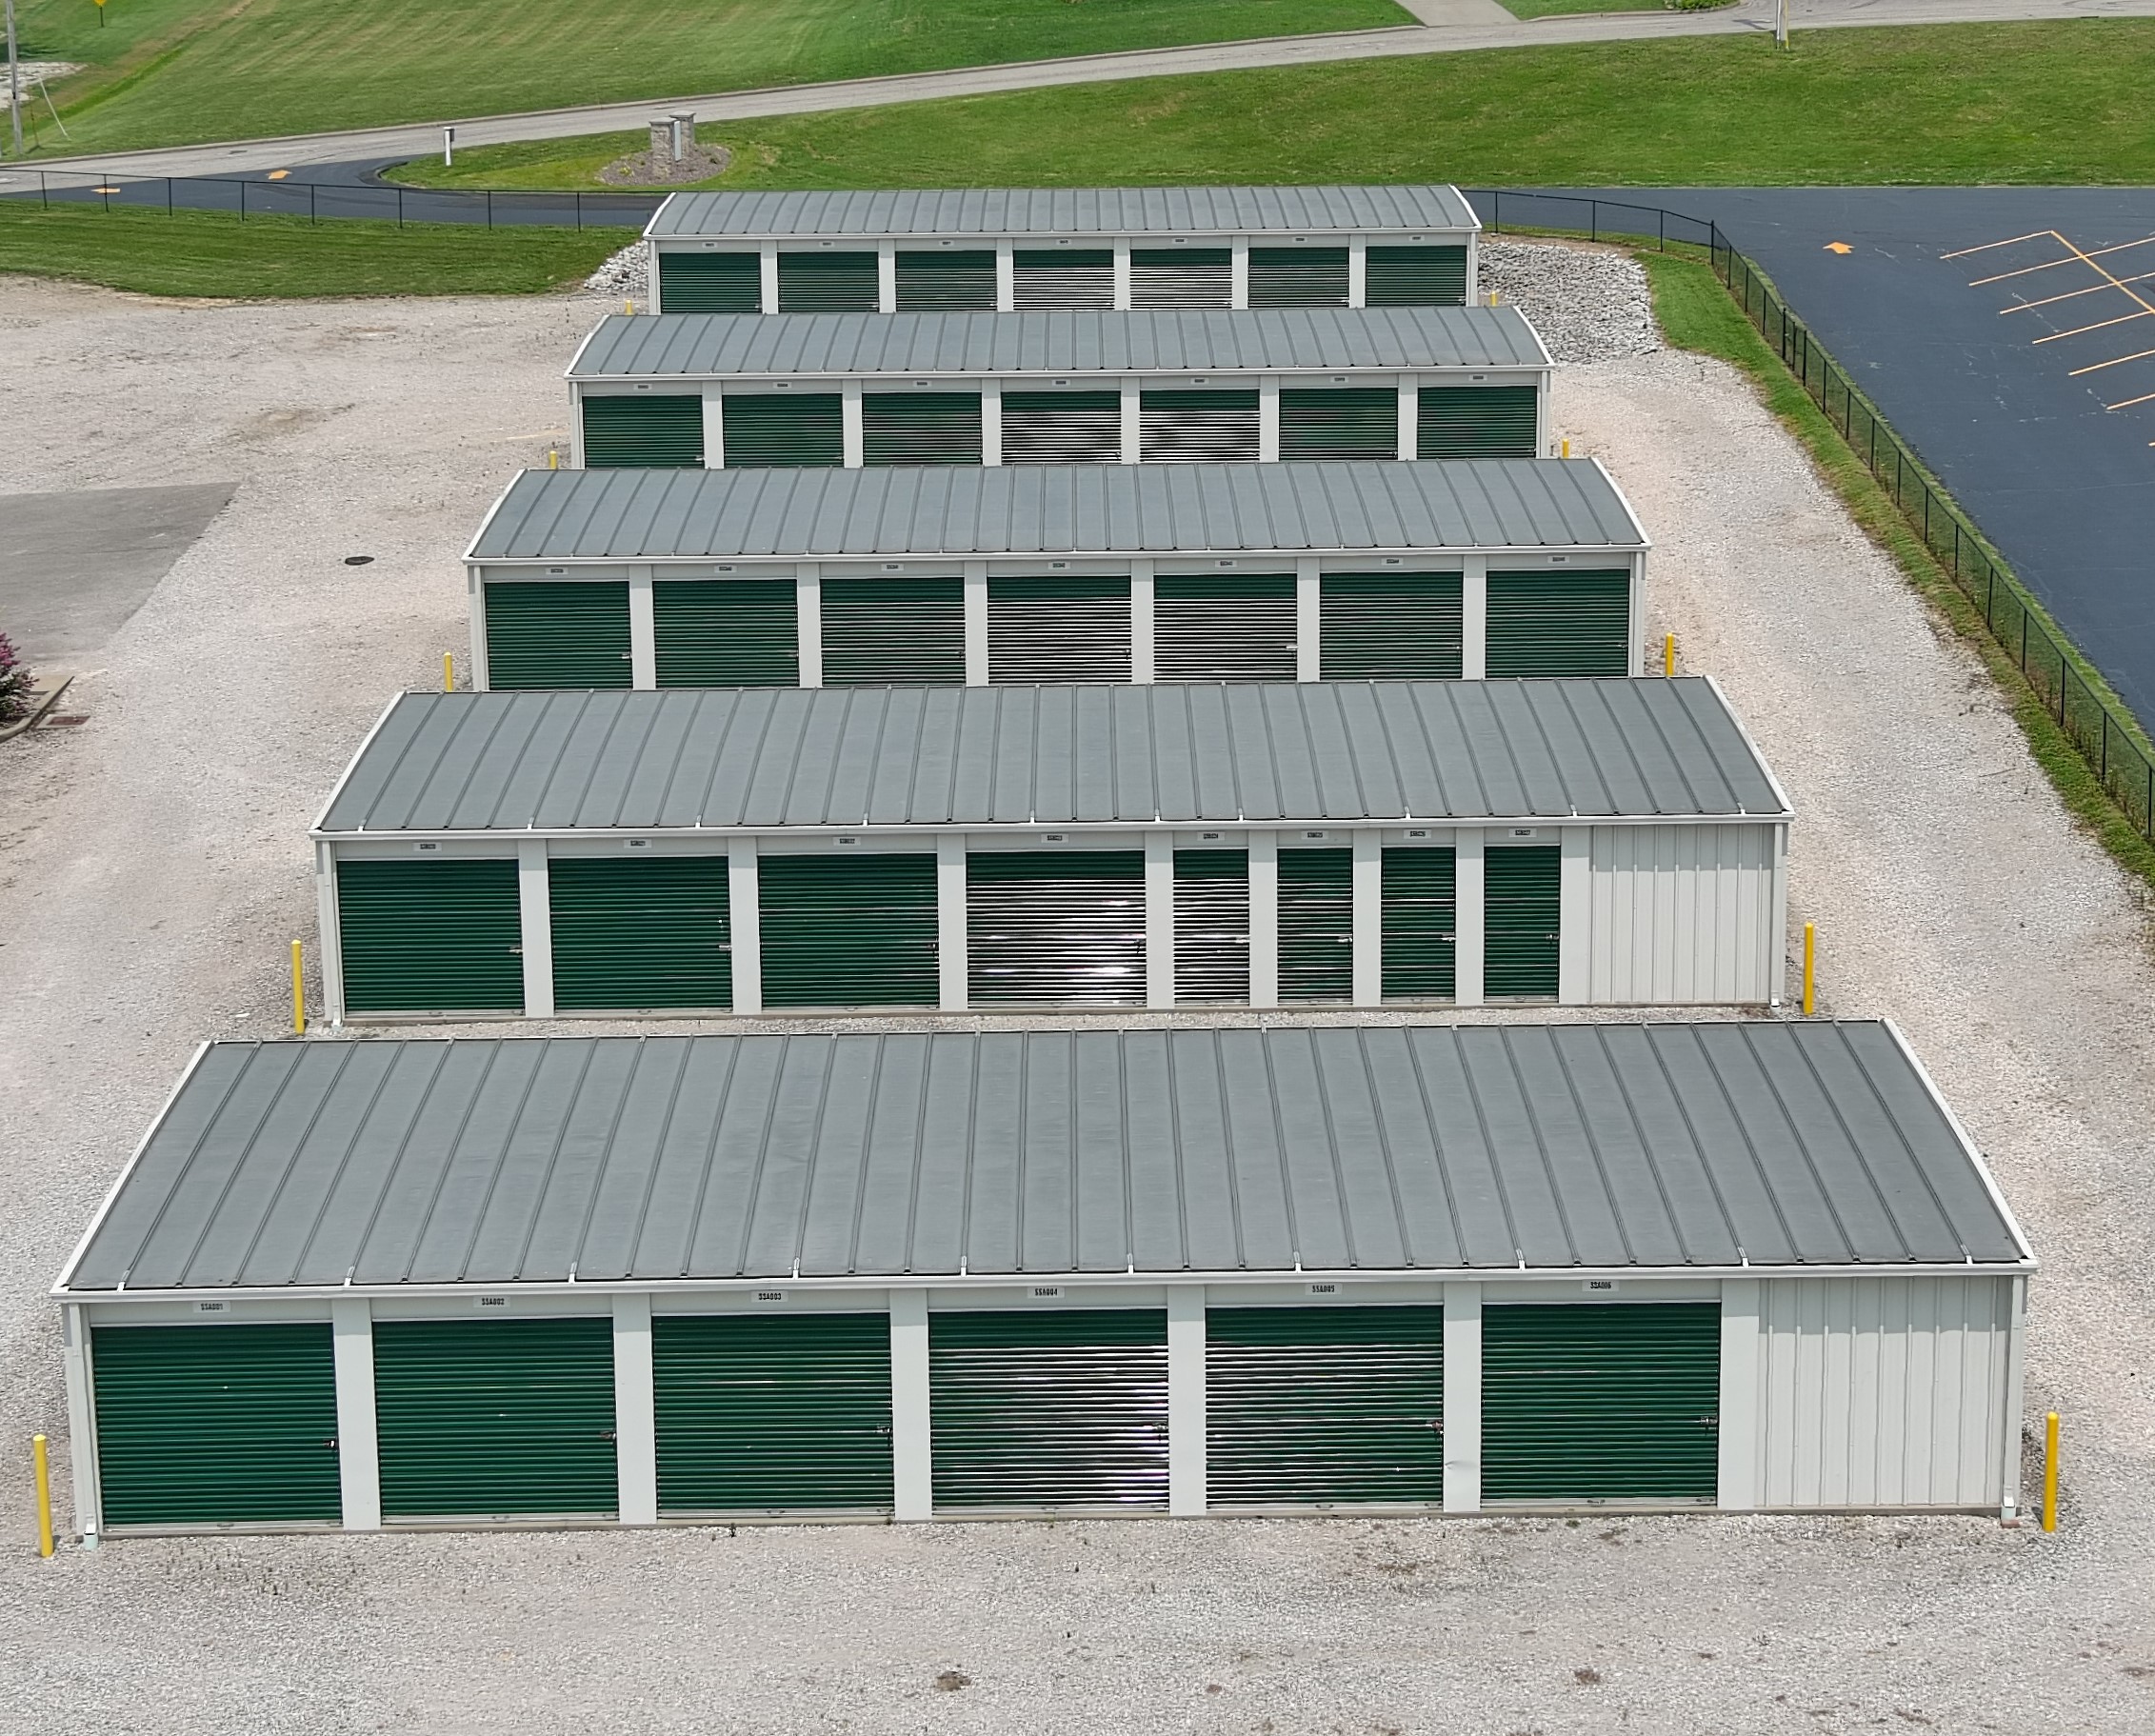 Accessible storage units with eye-catching green doors, complemented by broad driveways at Ferdinand's 1st St facility.